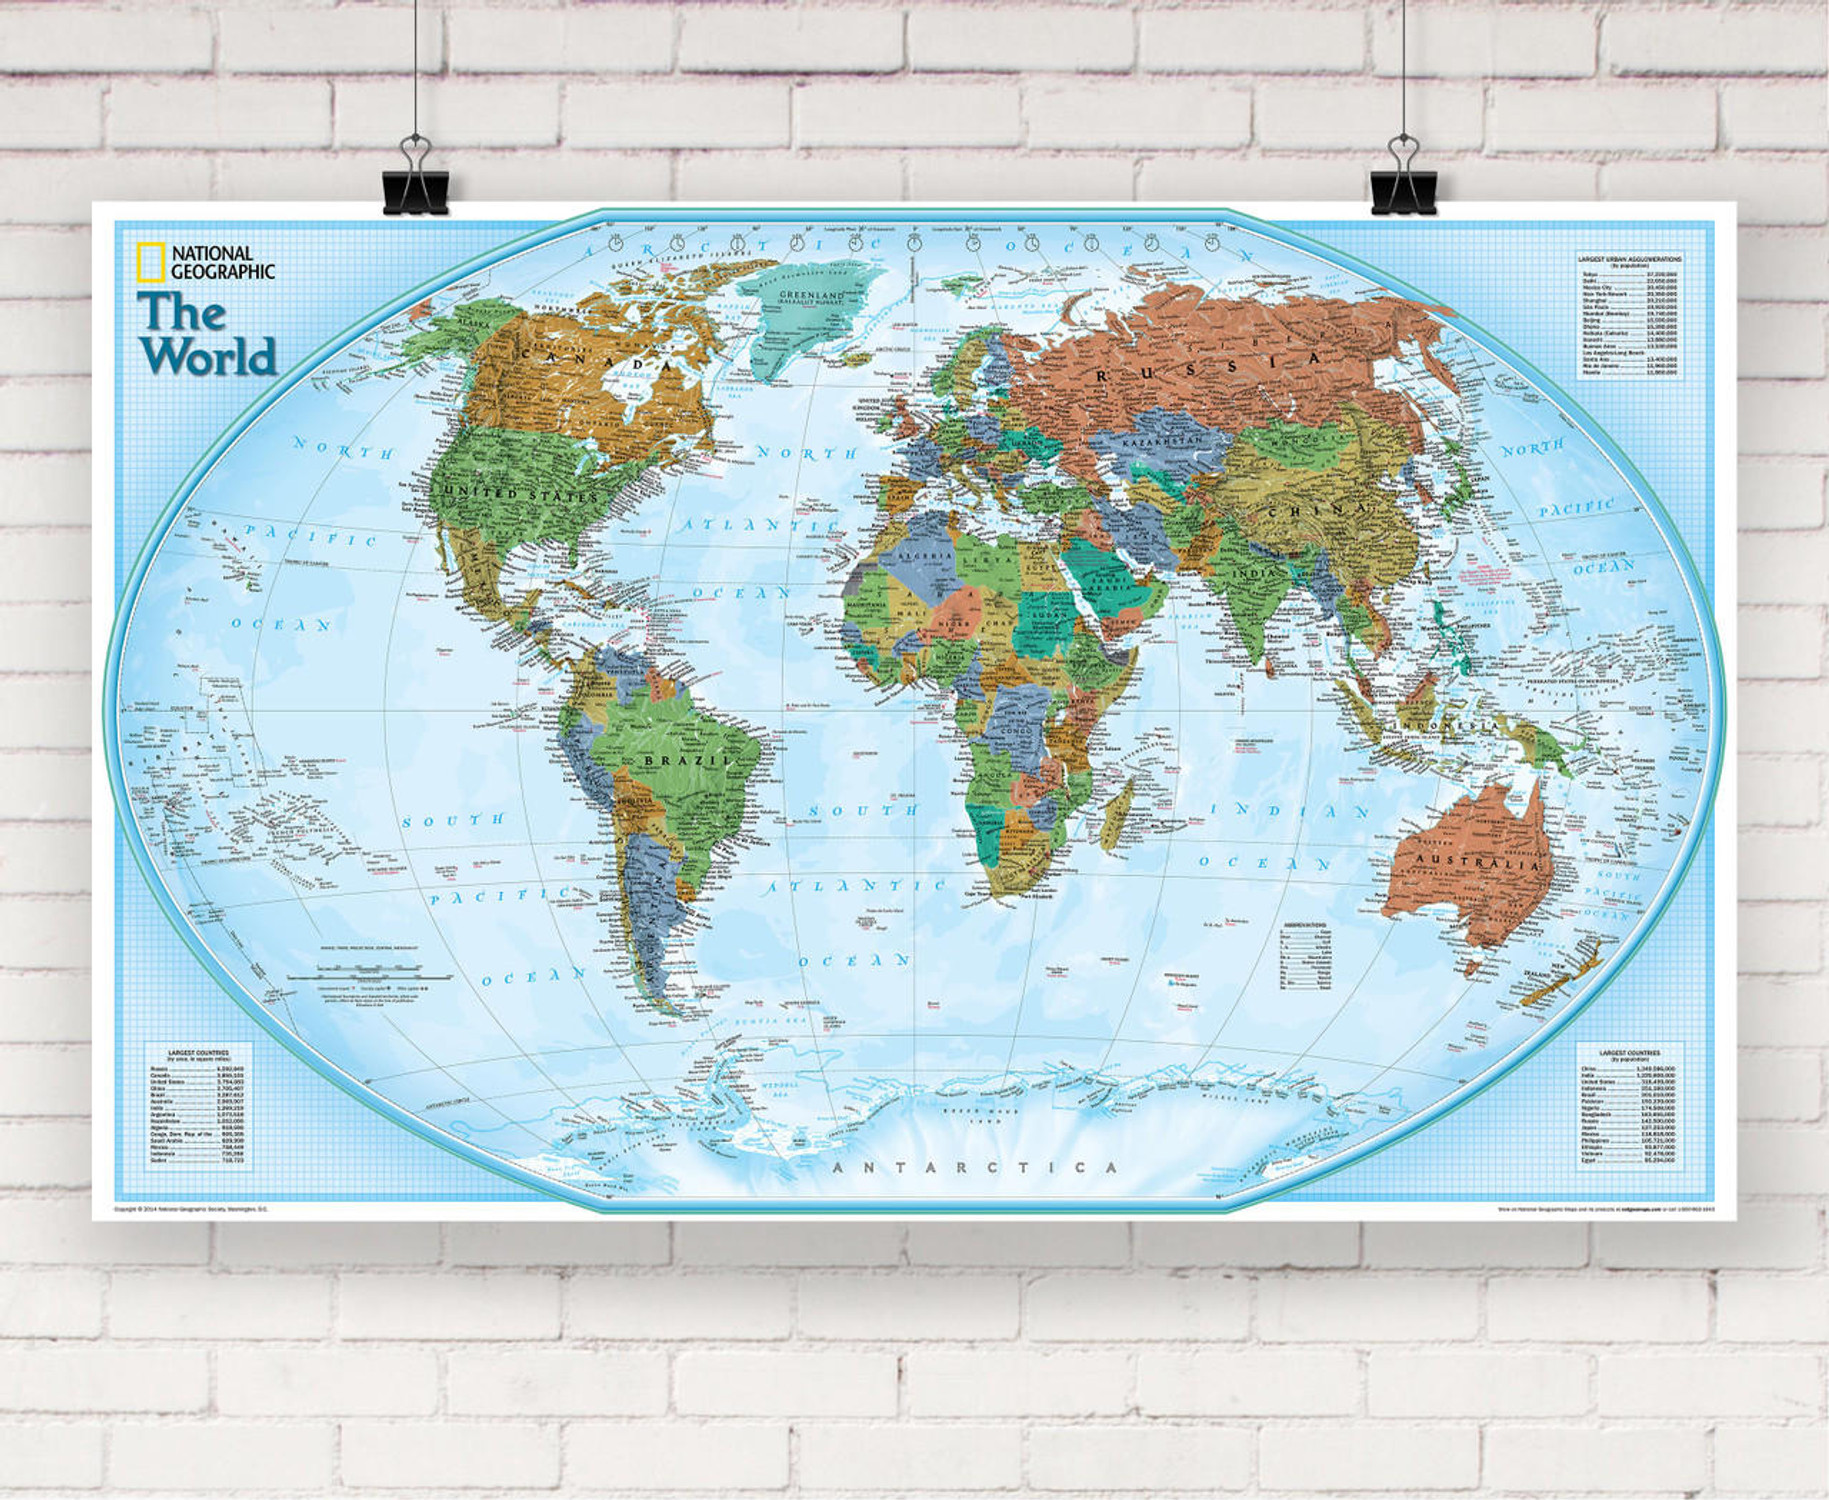 National Geographic World Explorer Wall Map, image 1, World Maps Online